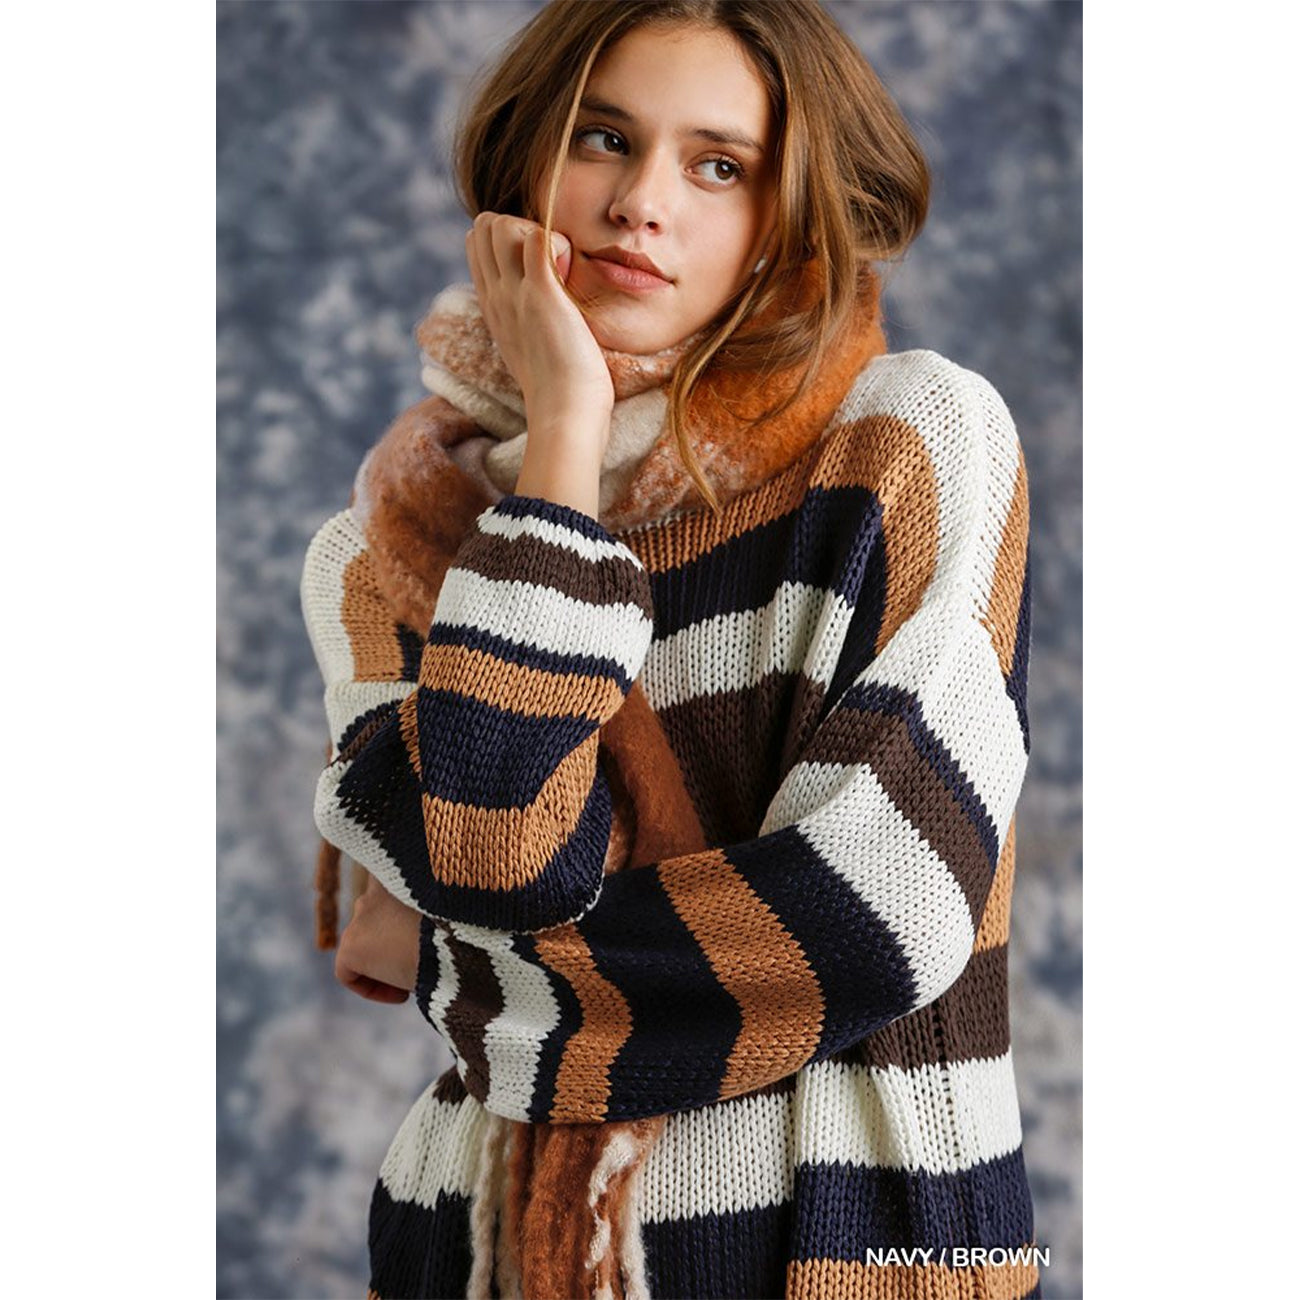 Multicolored Stripe Round Neck Long Sleeve Knit Sweater